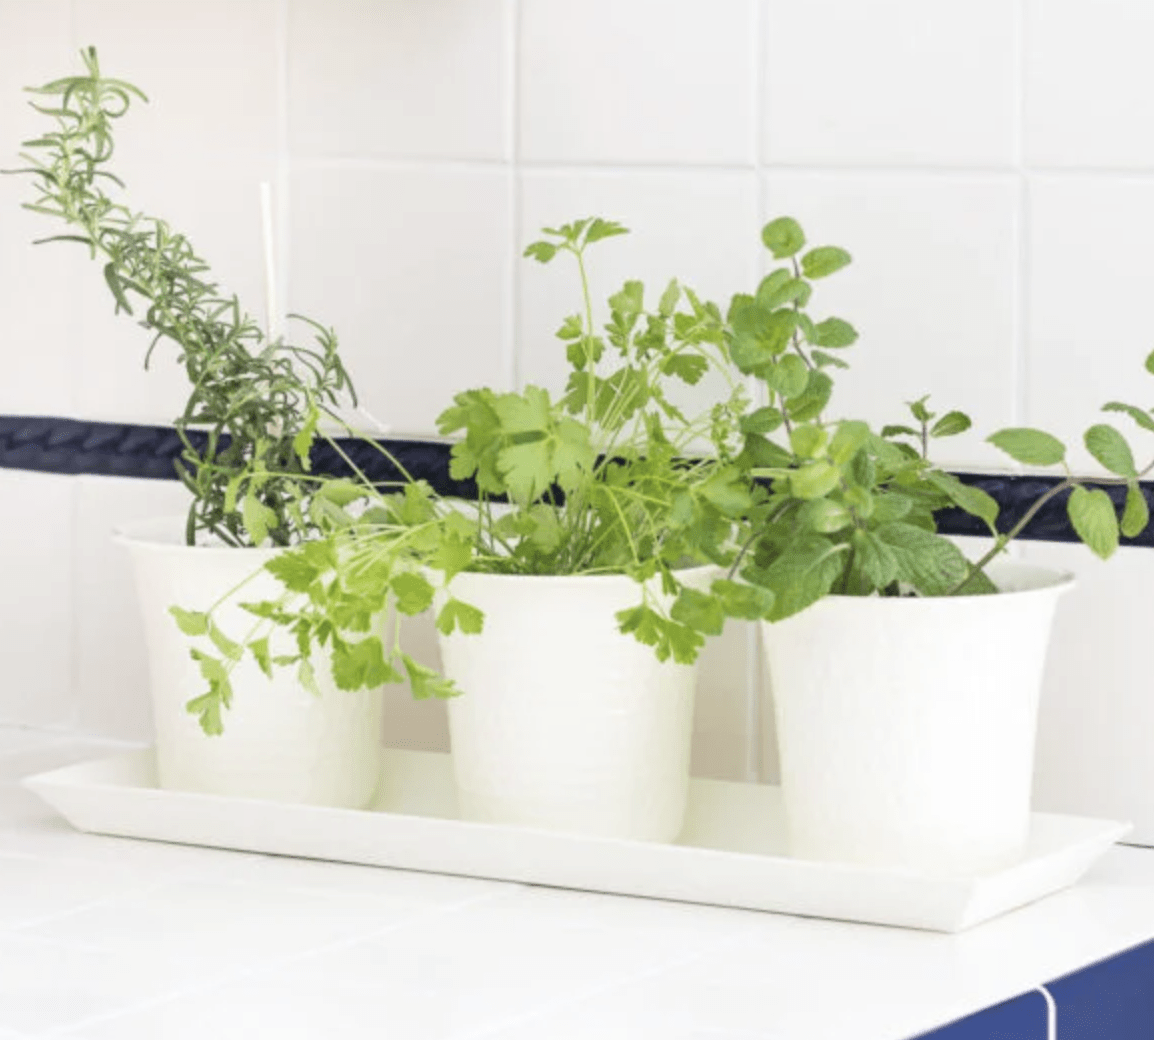 herbs in three white pots on kitchen counter